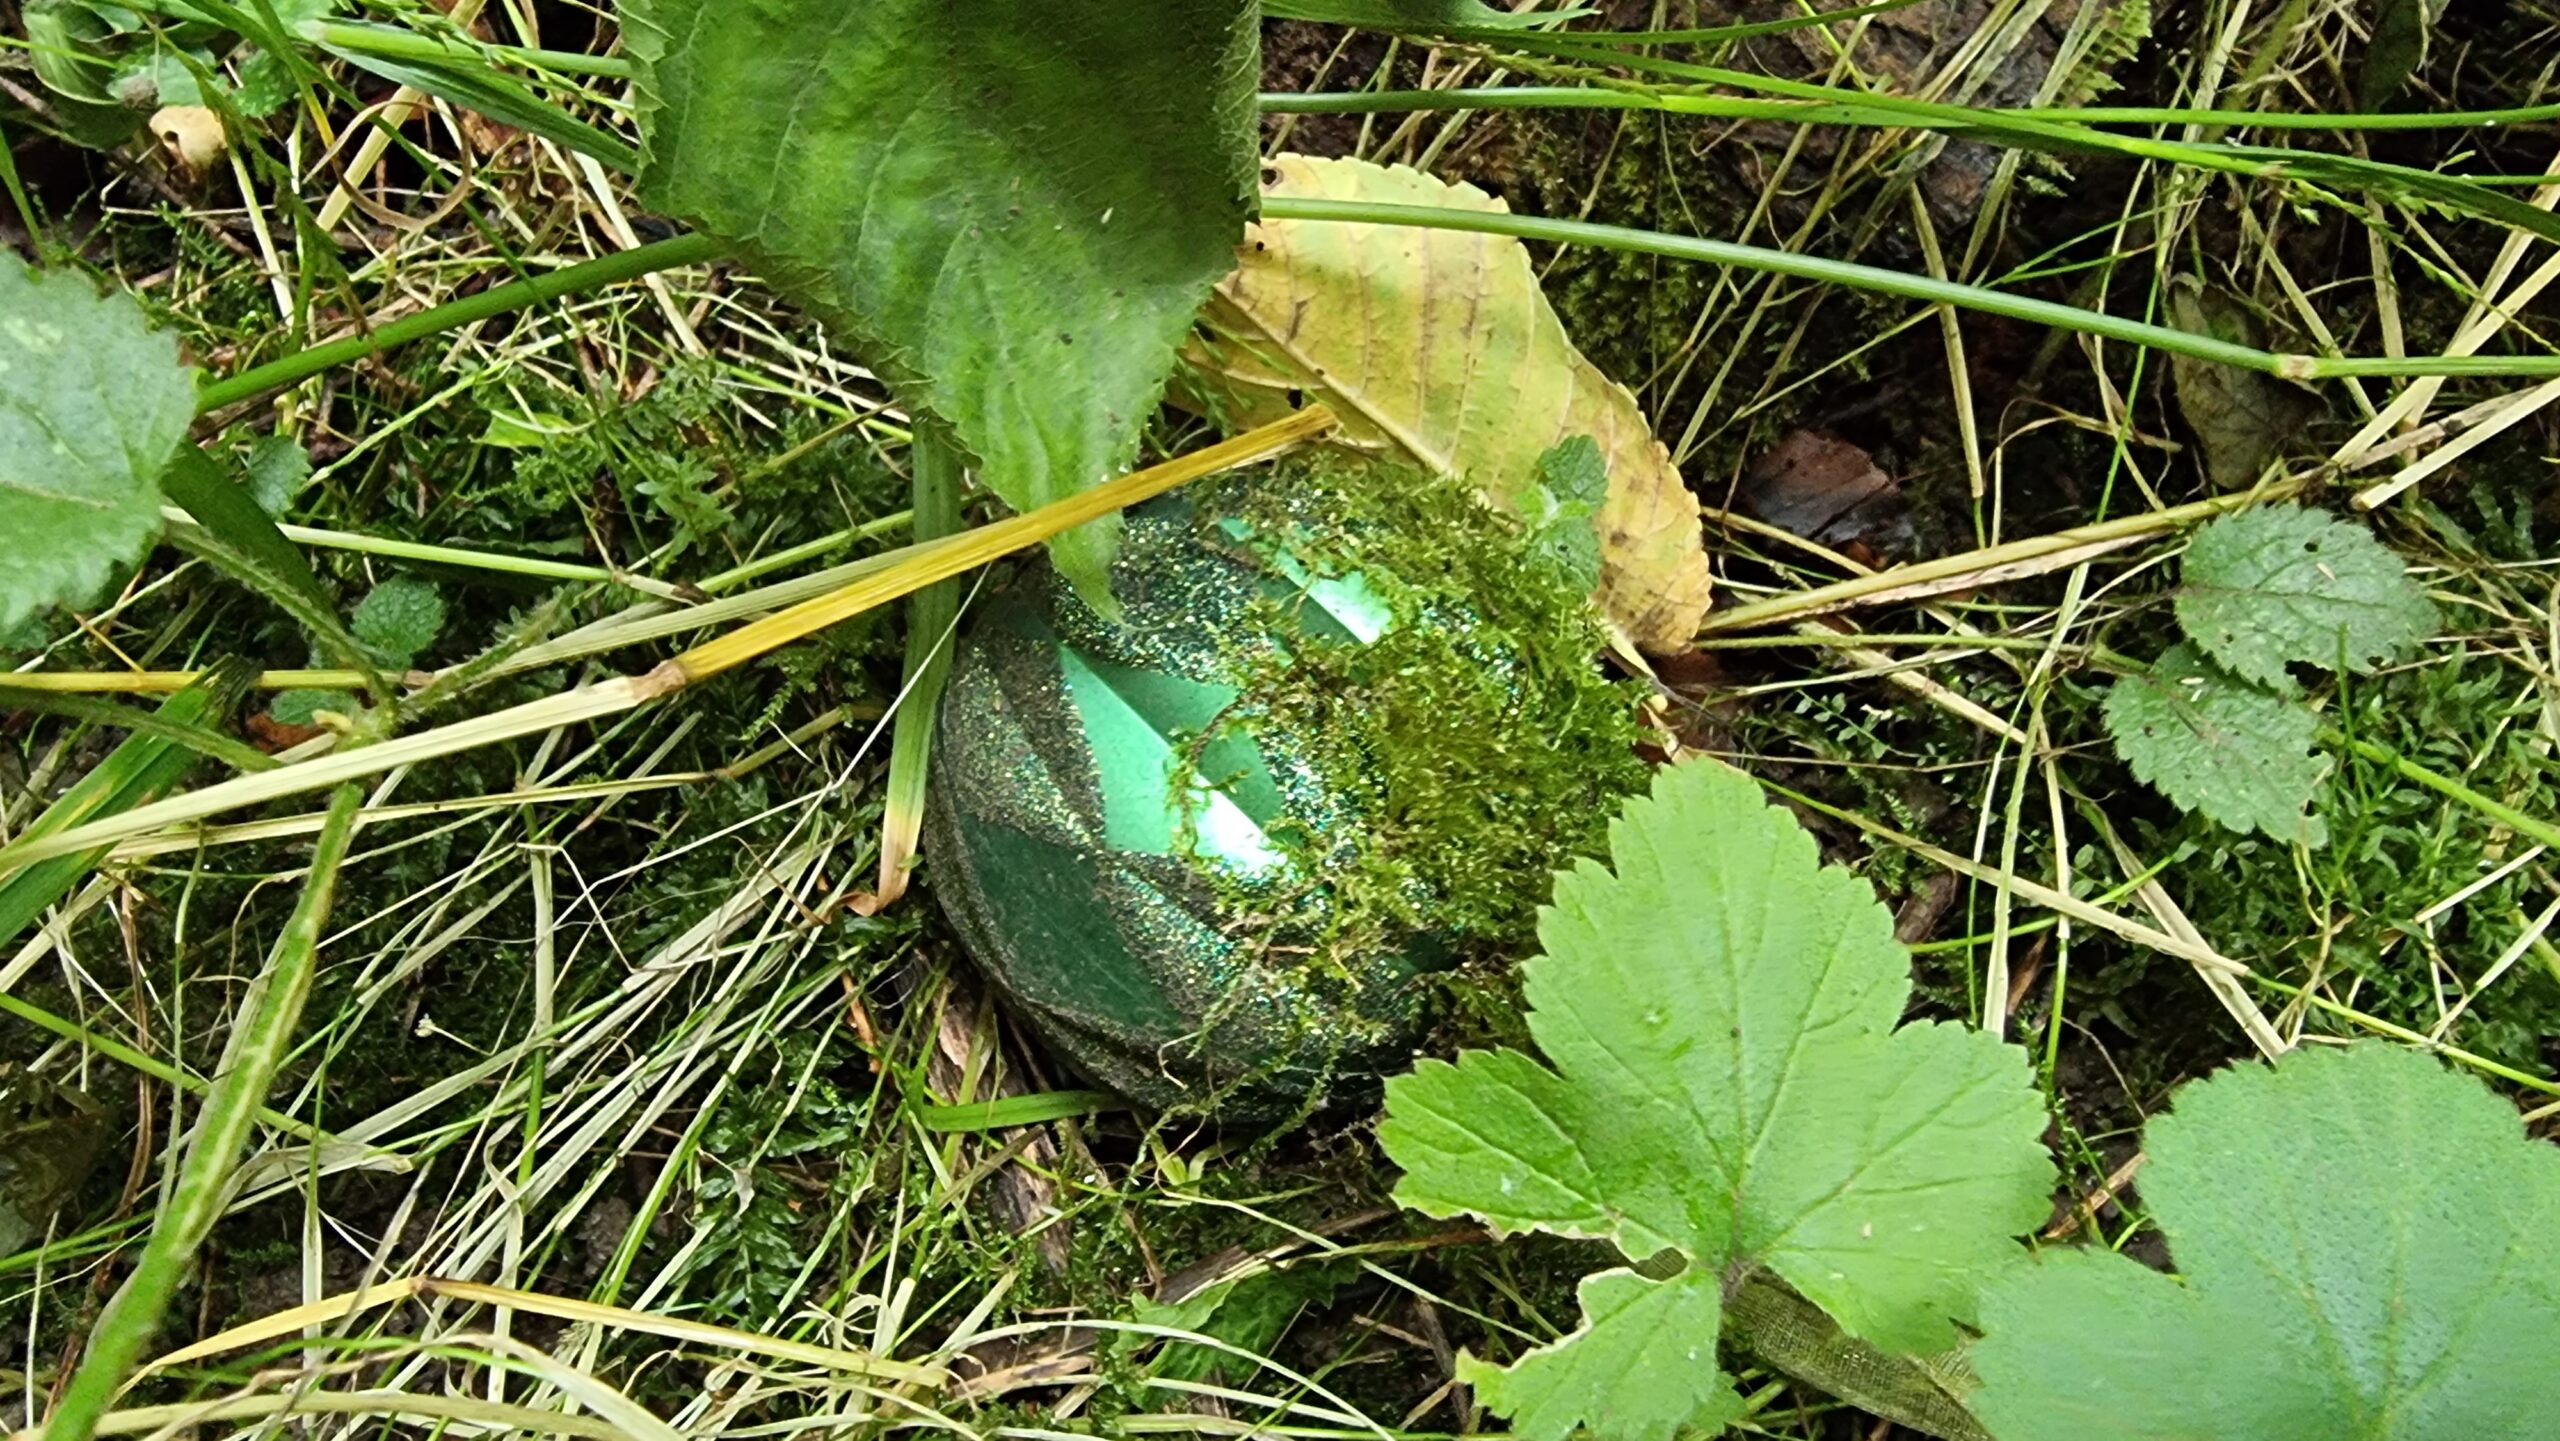 A green bauble buried in the mossy/grassy undergrowth of a forest floor.